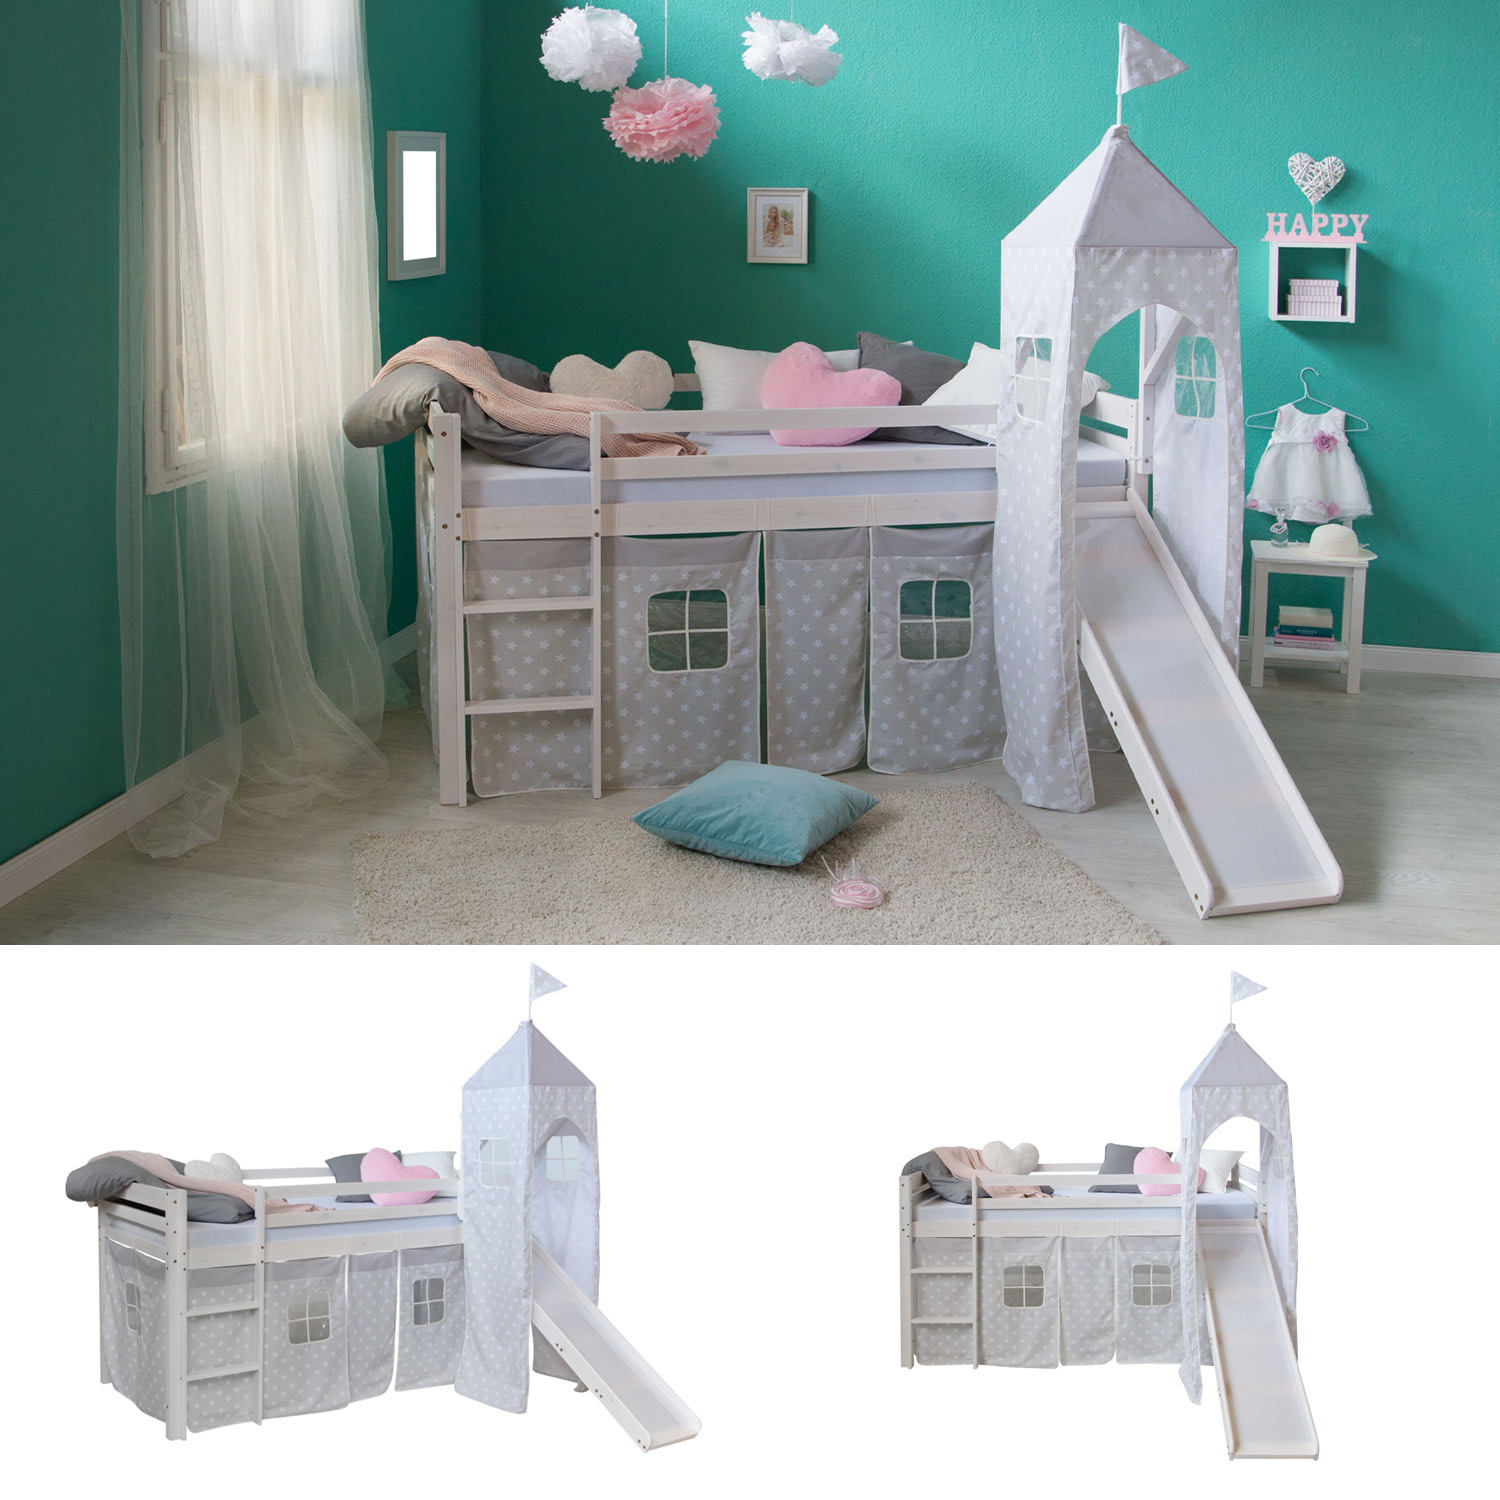 Cabin Bunk Bed High sleeper Loft Bed grey white pine Youth Bed Slide Tower Curtain Stars